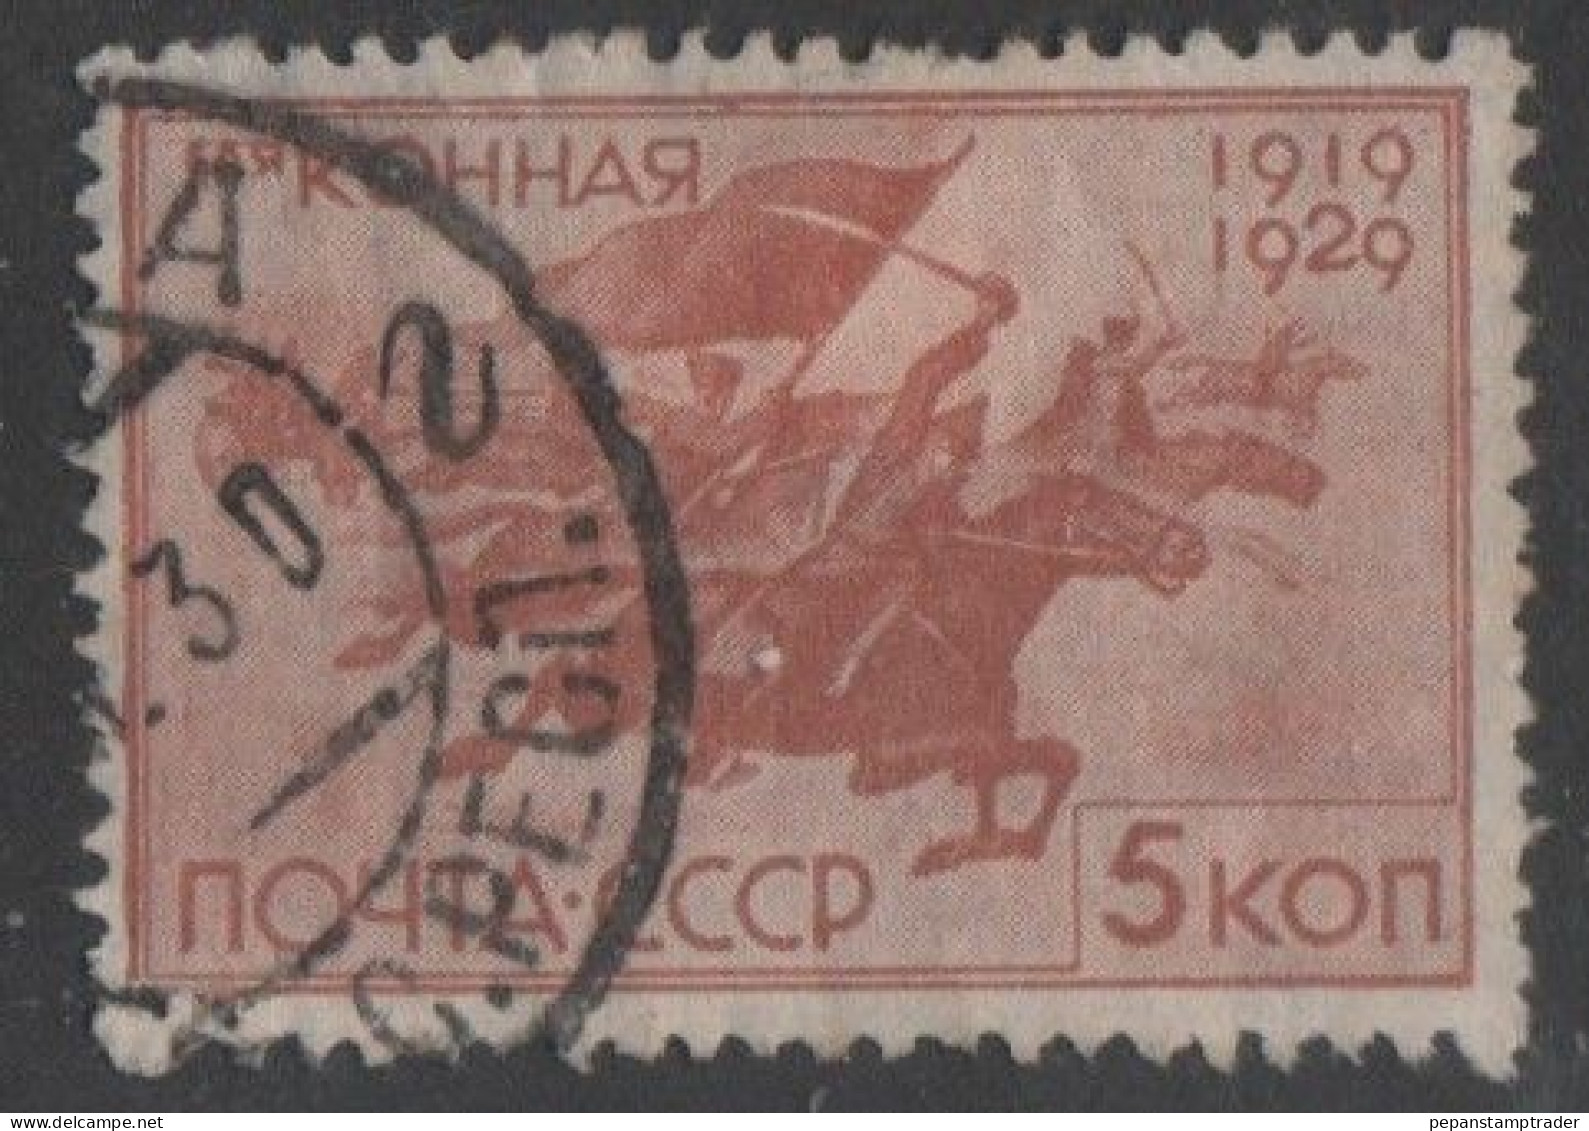 USSR - #432 -used - Used Stamps